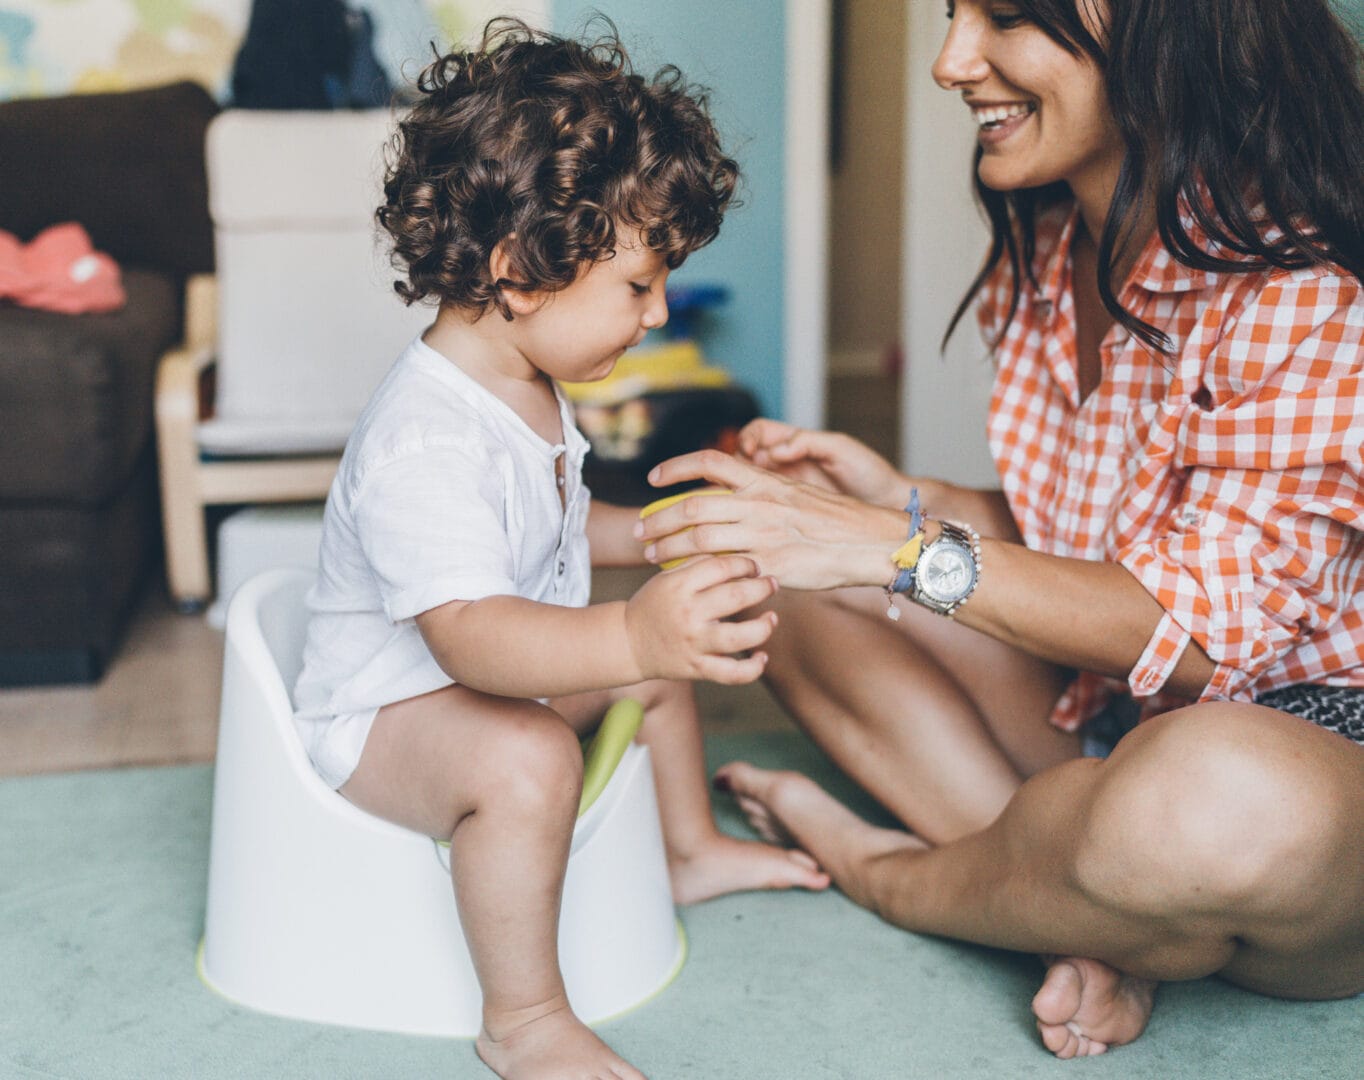 Potty training tips: All the must-knows from experts and parents who’ve been there